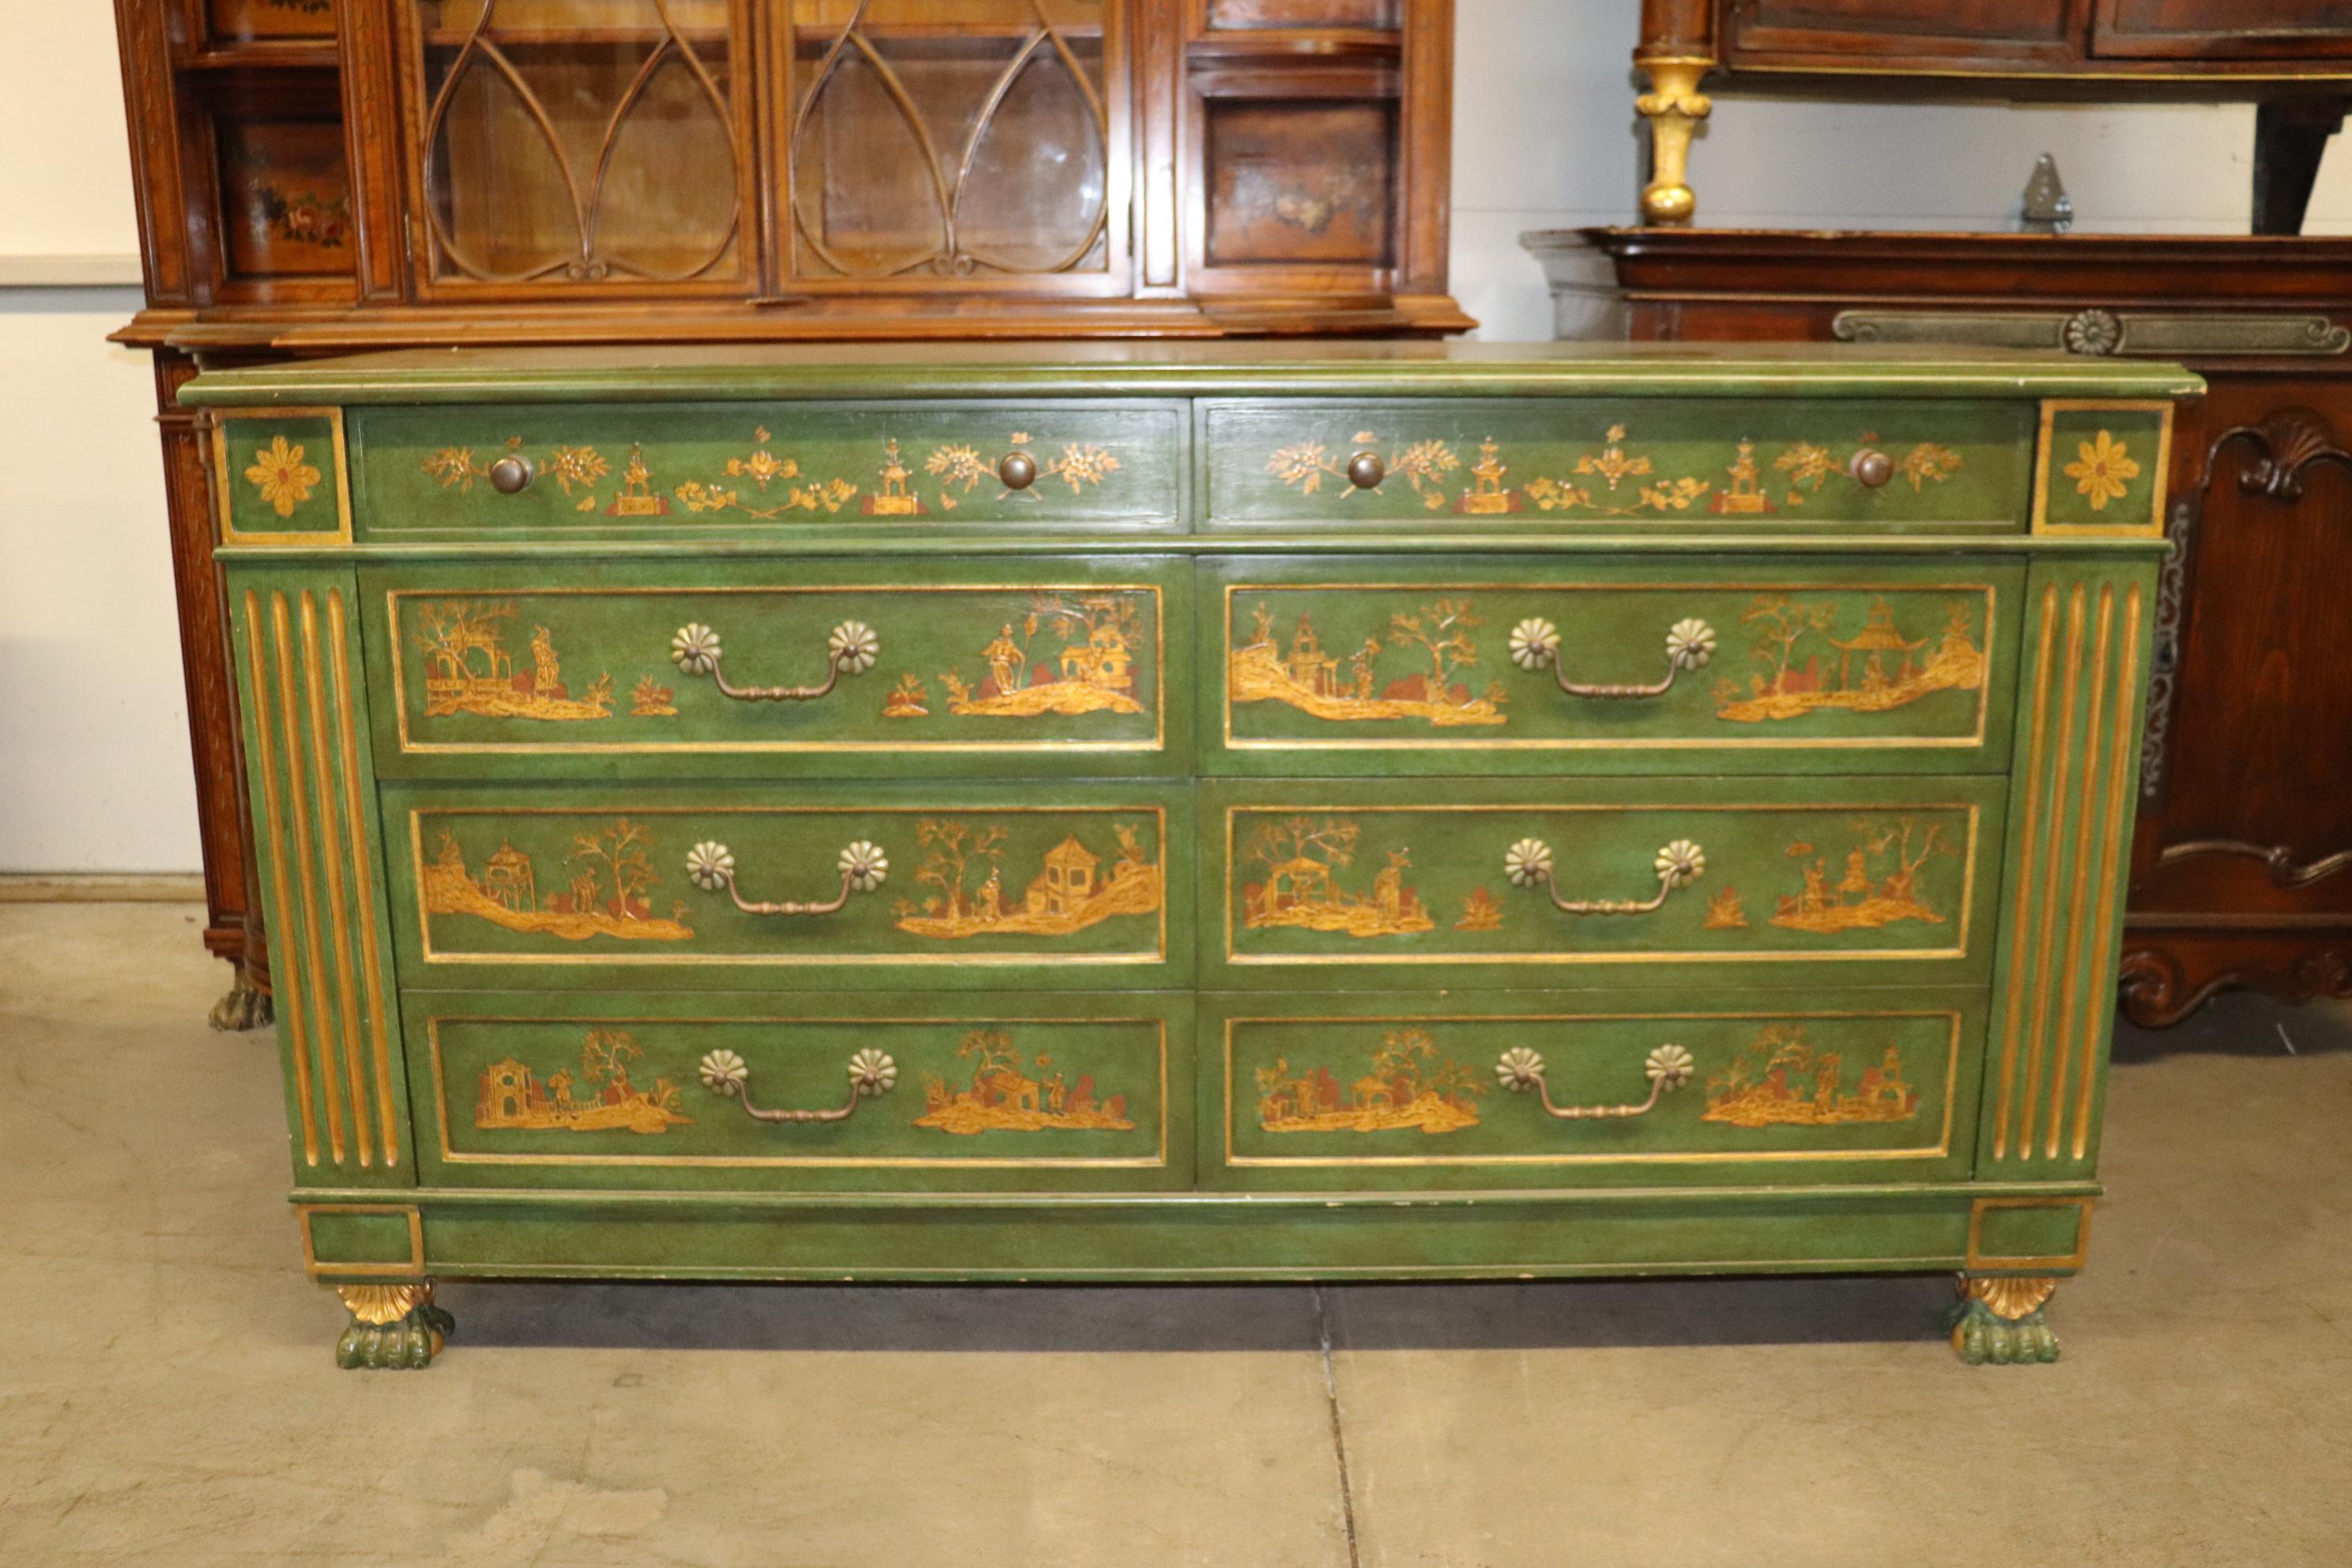 This is a truly beautiful 8 drawer French dircetoire dresser done in raised chinoiserie done in gold over a green background. The piece is absolutely beautiful and measures 67 wide x 21 deep and dates to teh 1950s era.